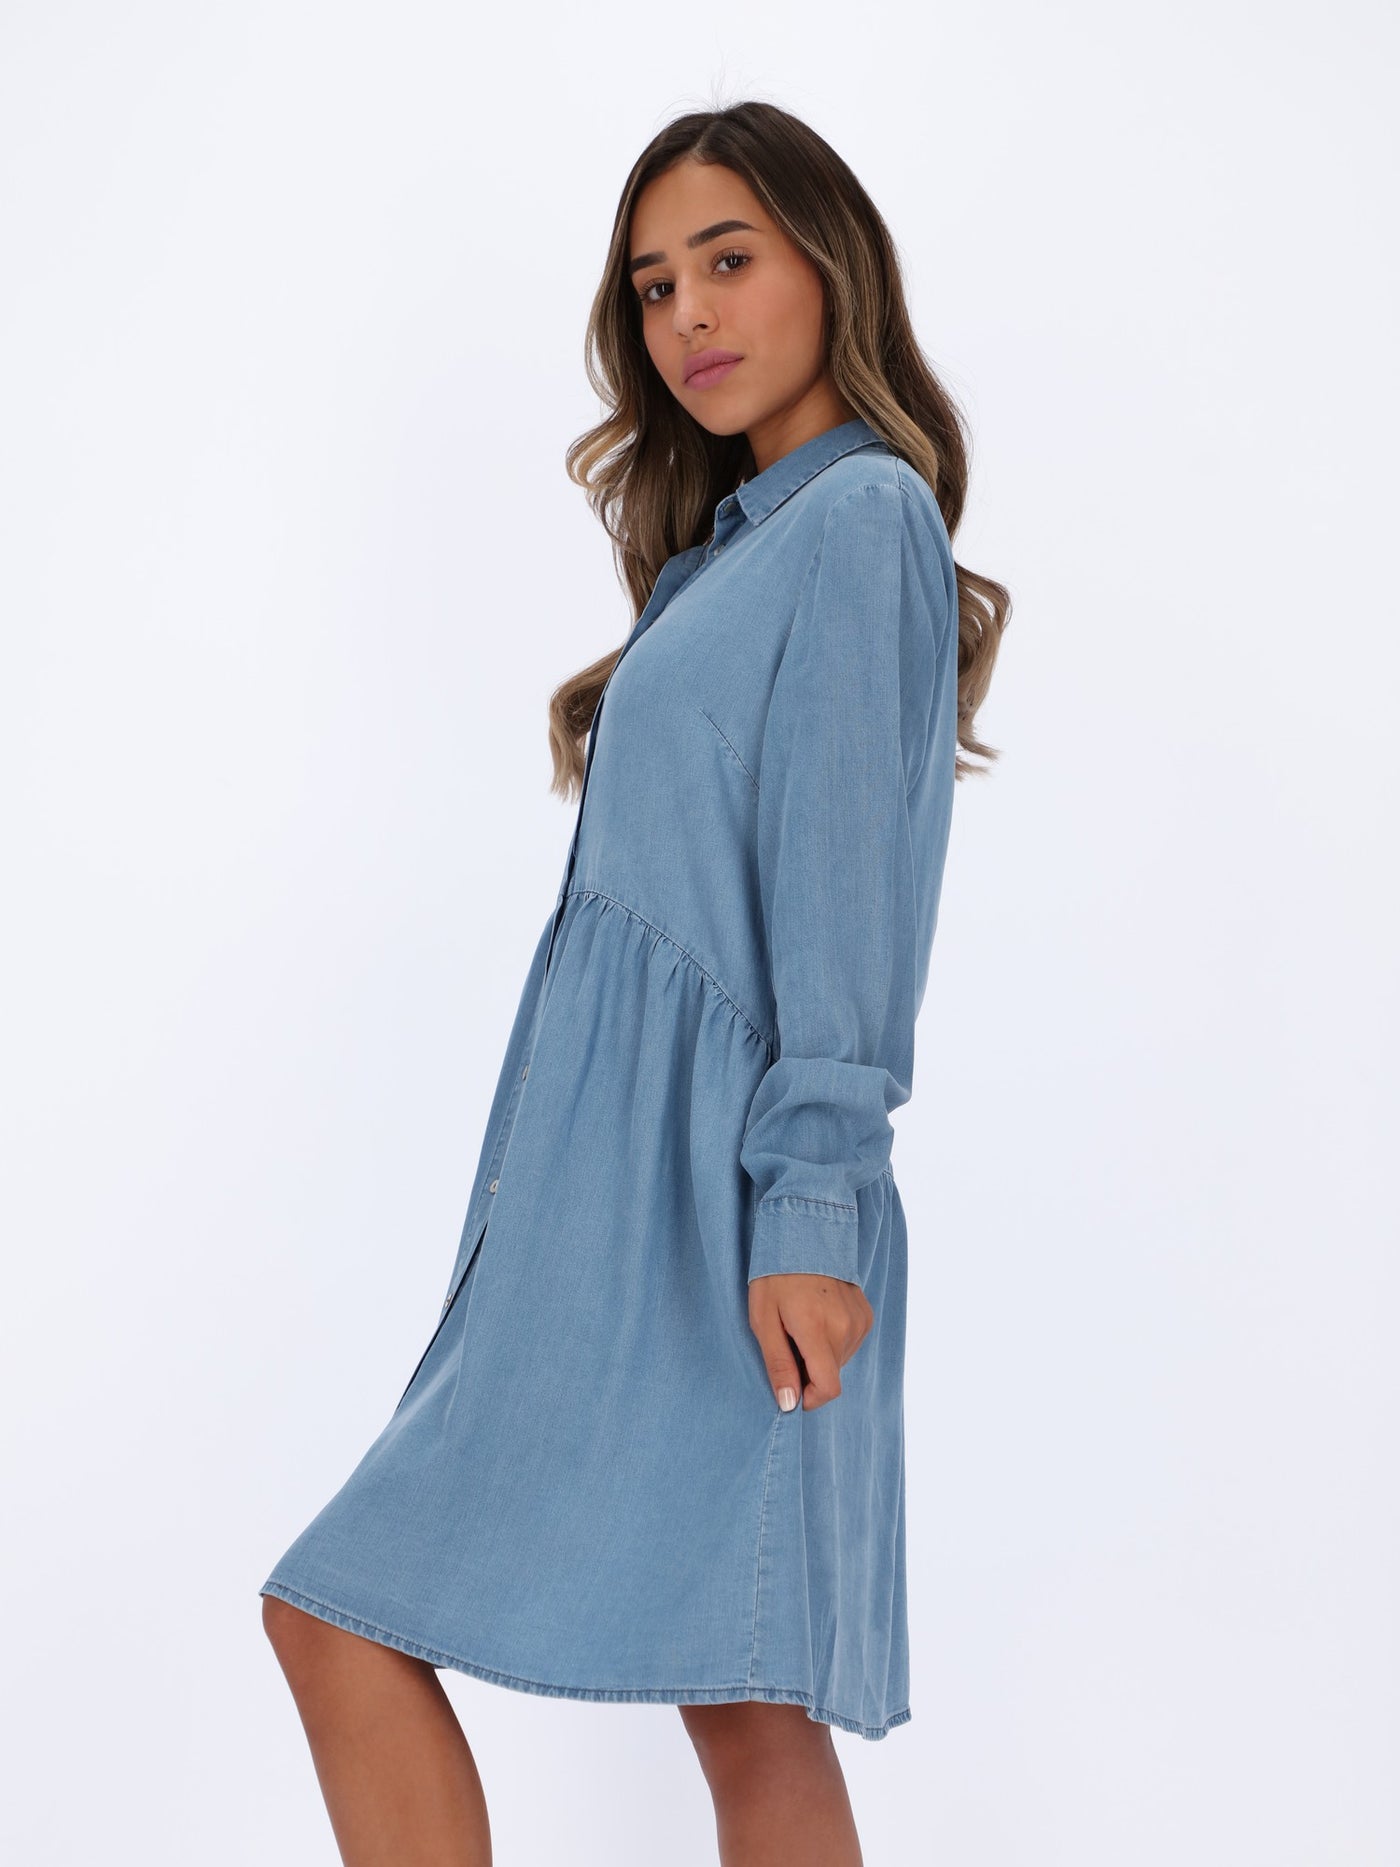 Skater Style Tunic